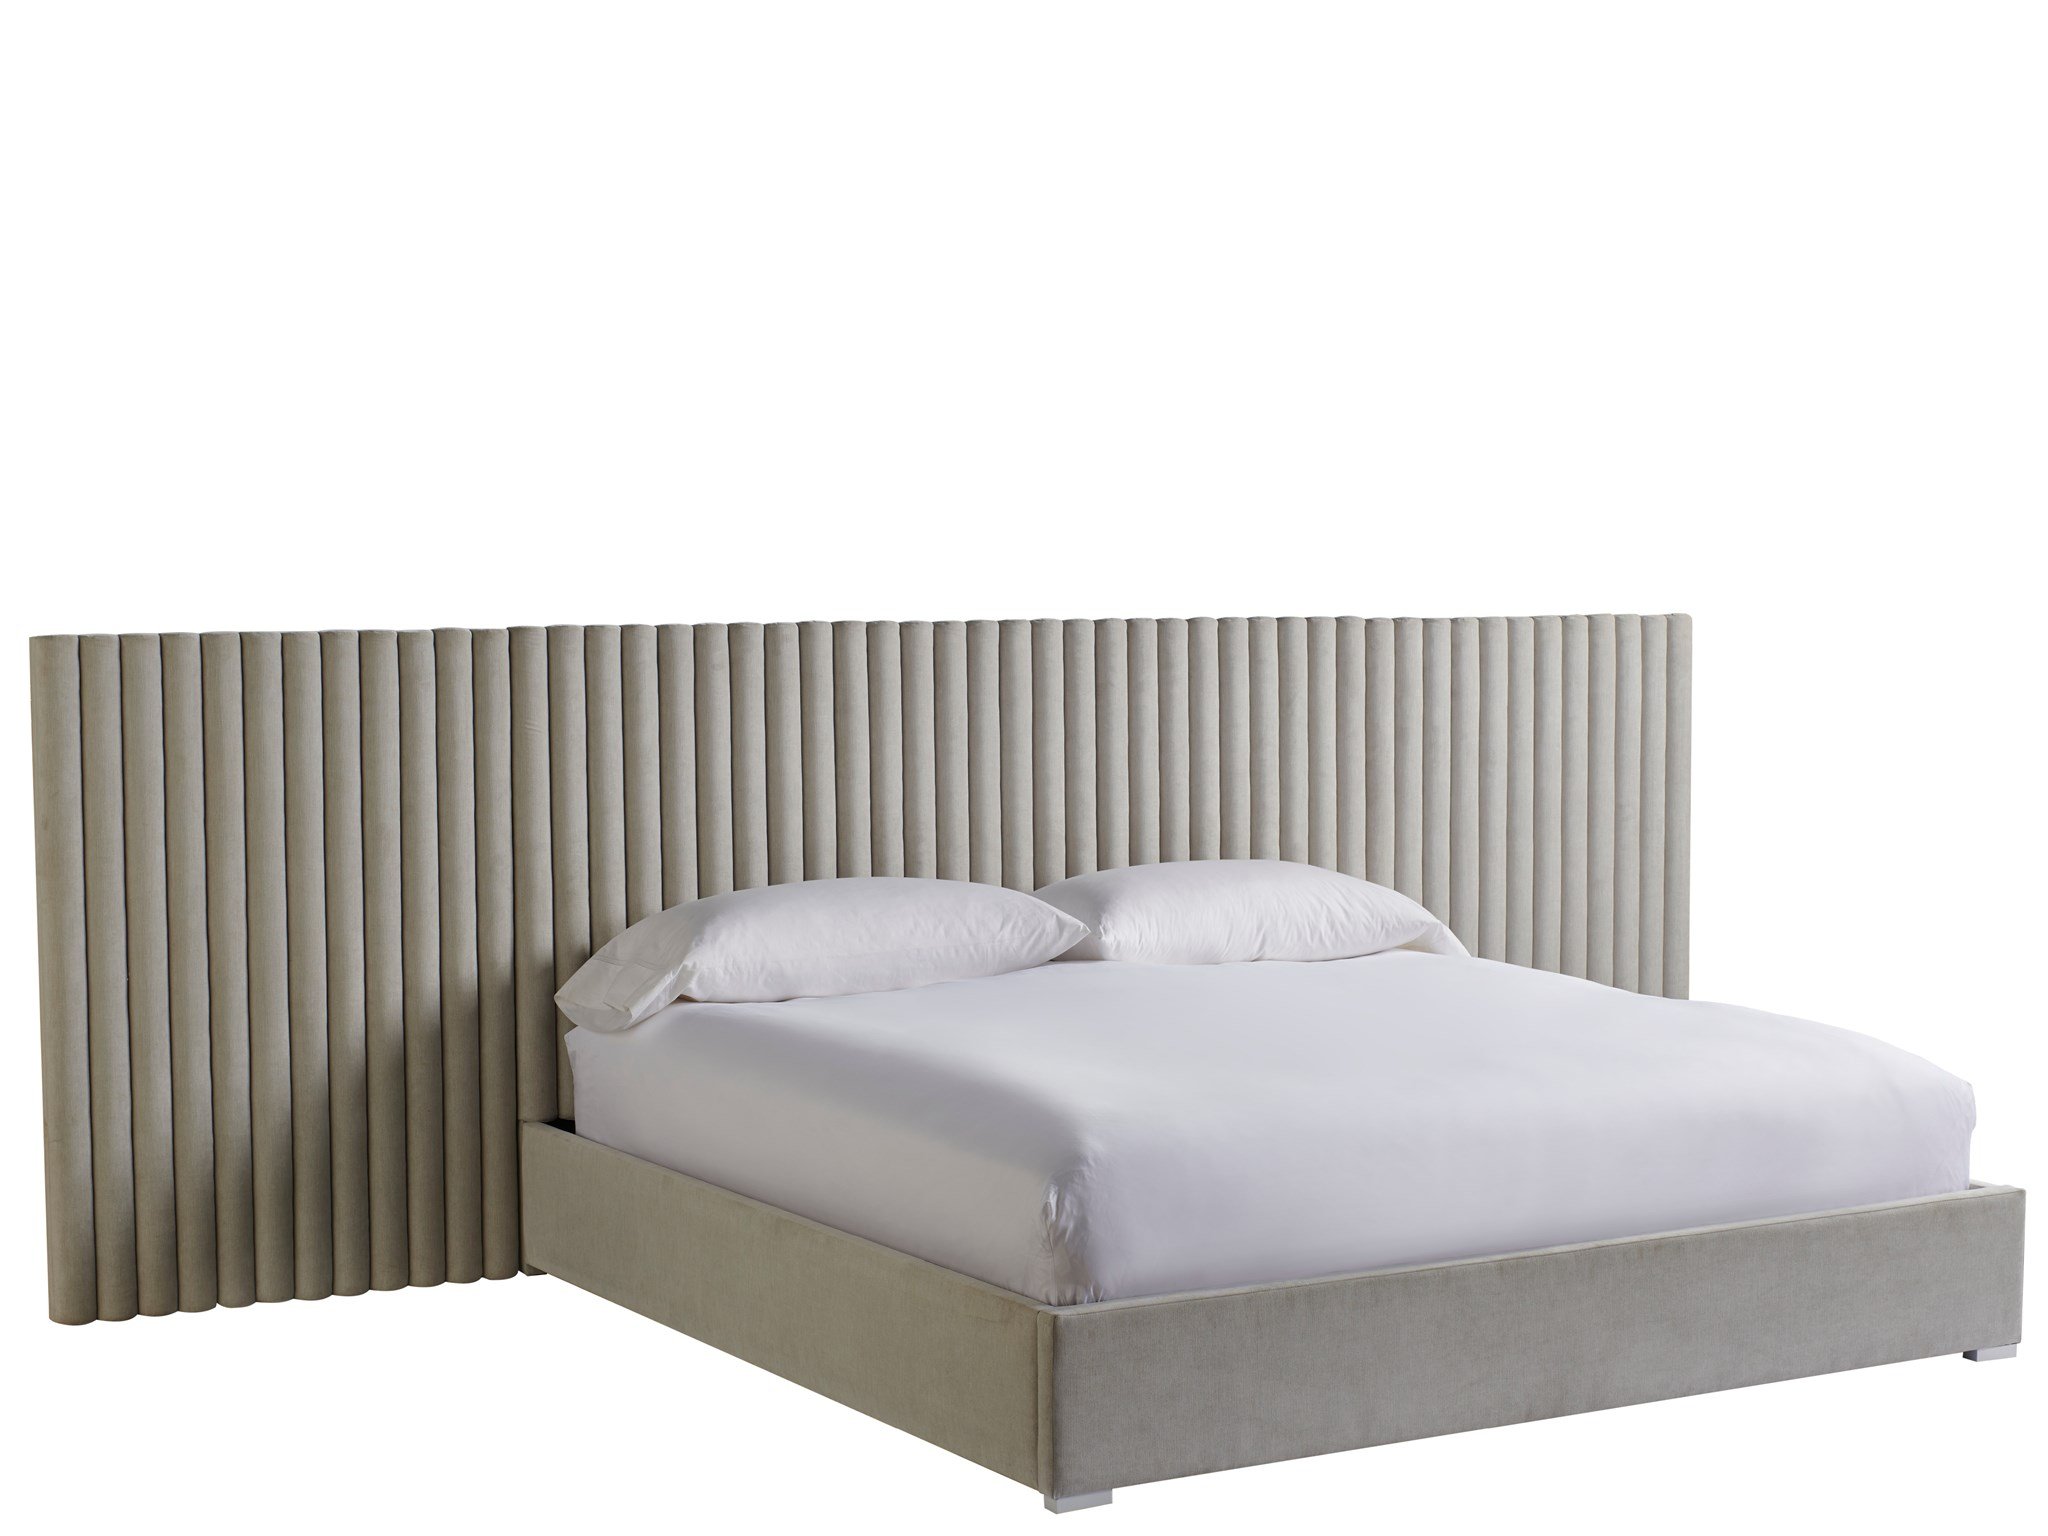 Decker King Wall Bed with Panels